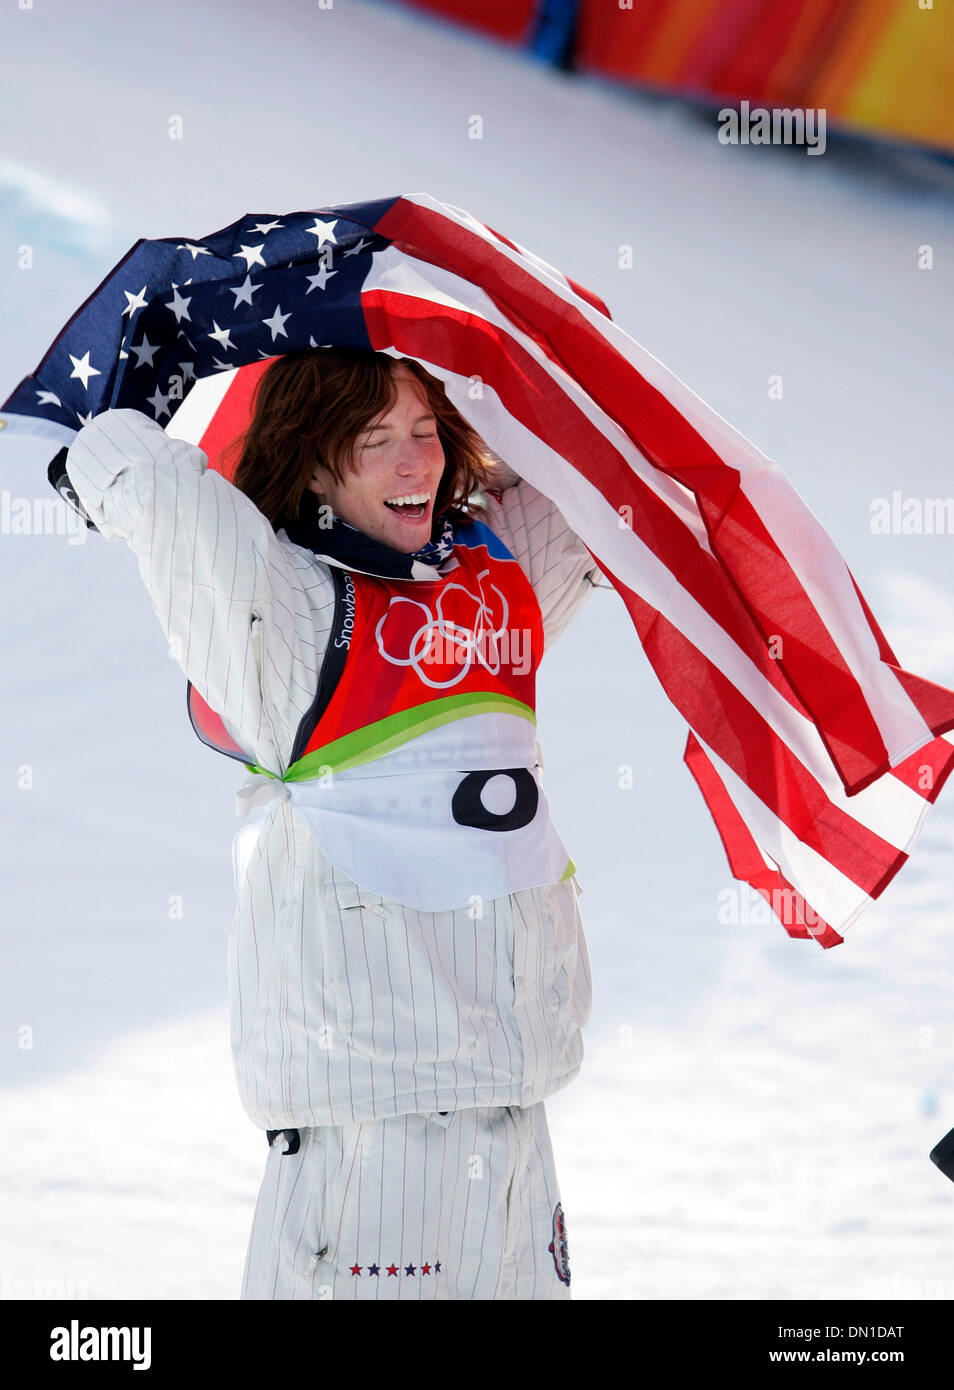 Feb 12, 2006; Bardonecchia, ITALY; XX Winter Olympics SHAUN WHITE of the US celebrates after winning a gold medal in the mens half pipe snowboarding competition at the Torino 2006 Winter Olympic